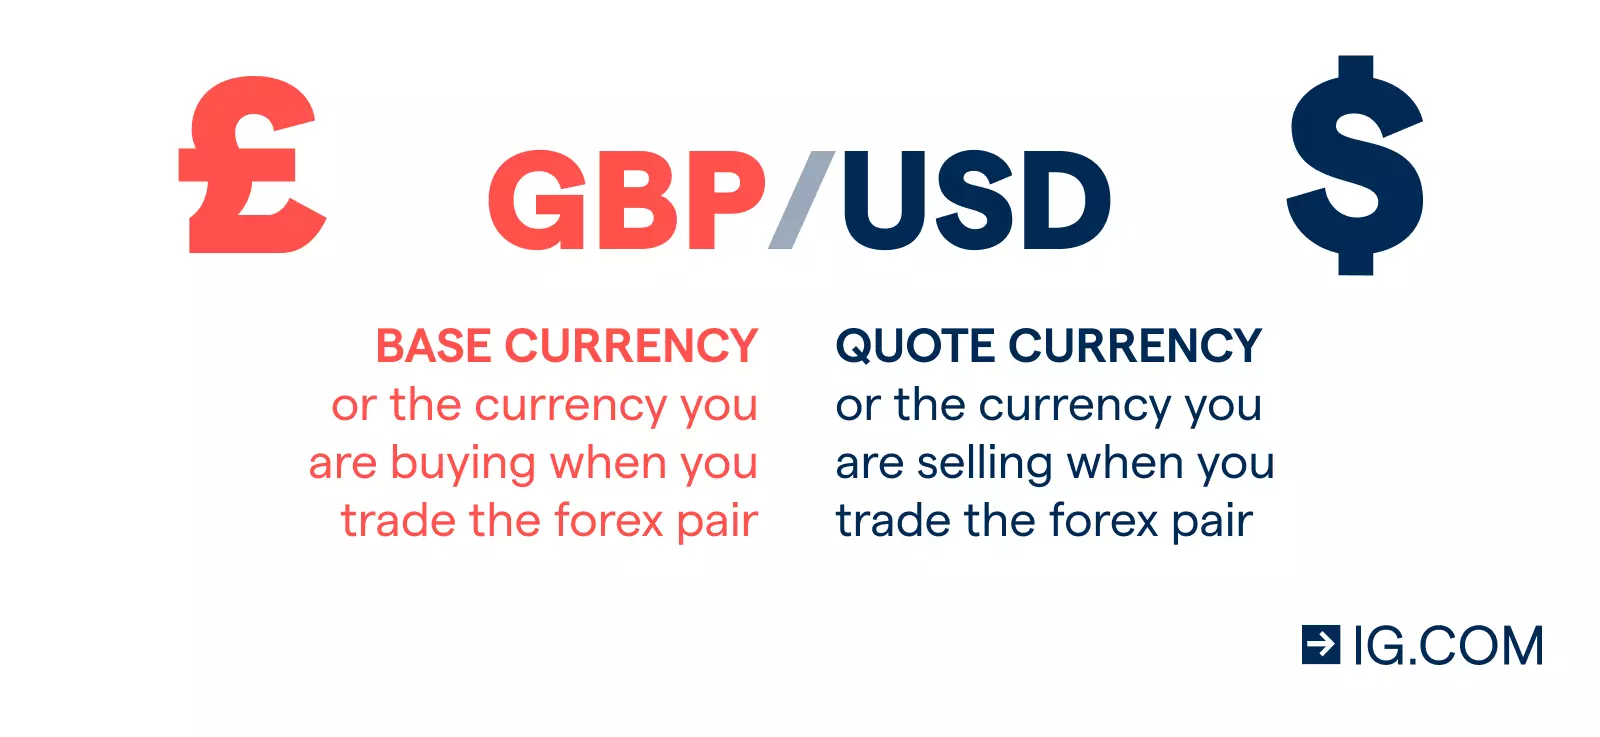 FX option pairs include the base and quote currency